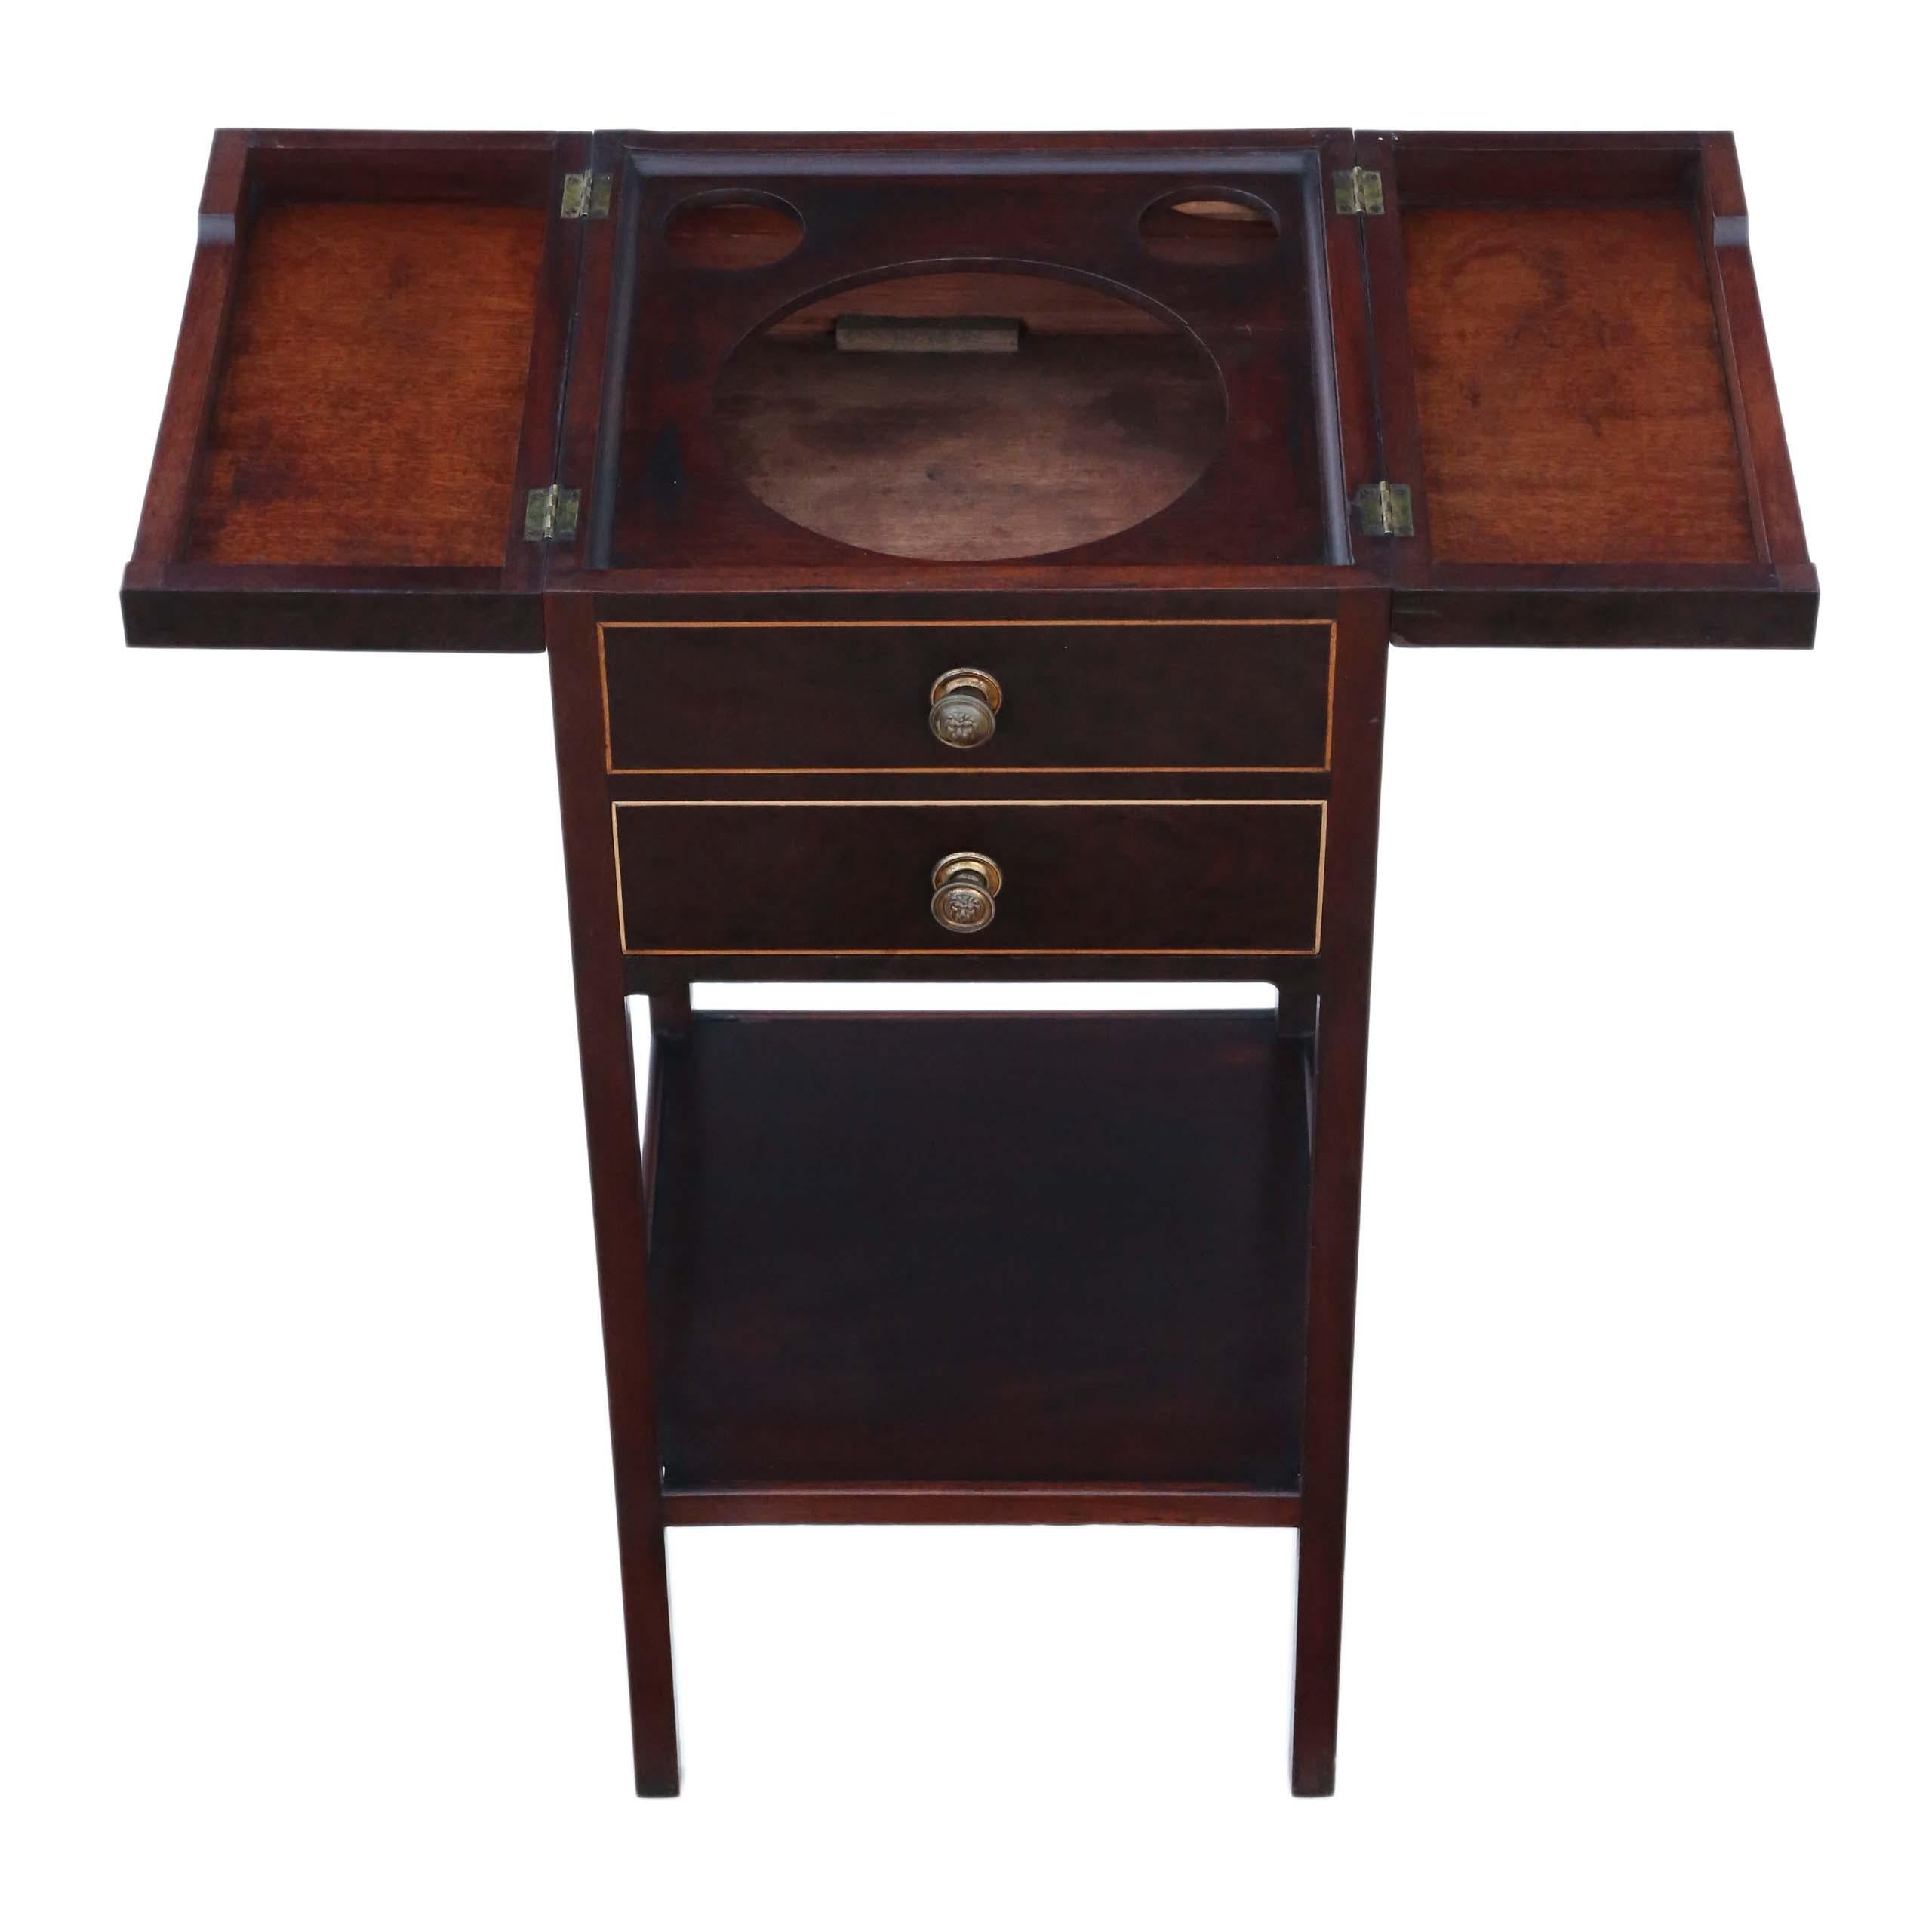 Antique fine quality Georgian mahogany bedside table washstand, circa 1800-1810.
Great rare item, which is solid with no loose joints and no woodworm. The mahogany lined drawer slides freely (the top one is a dummy, concealing the